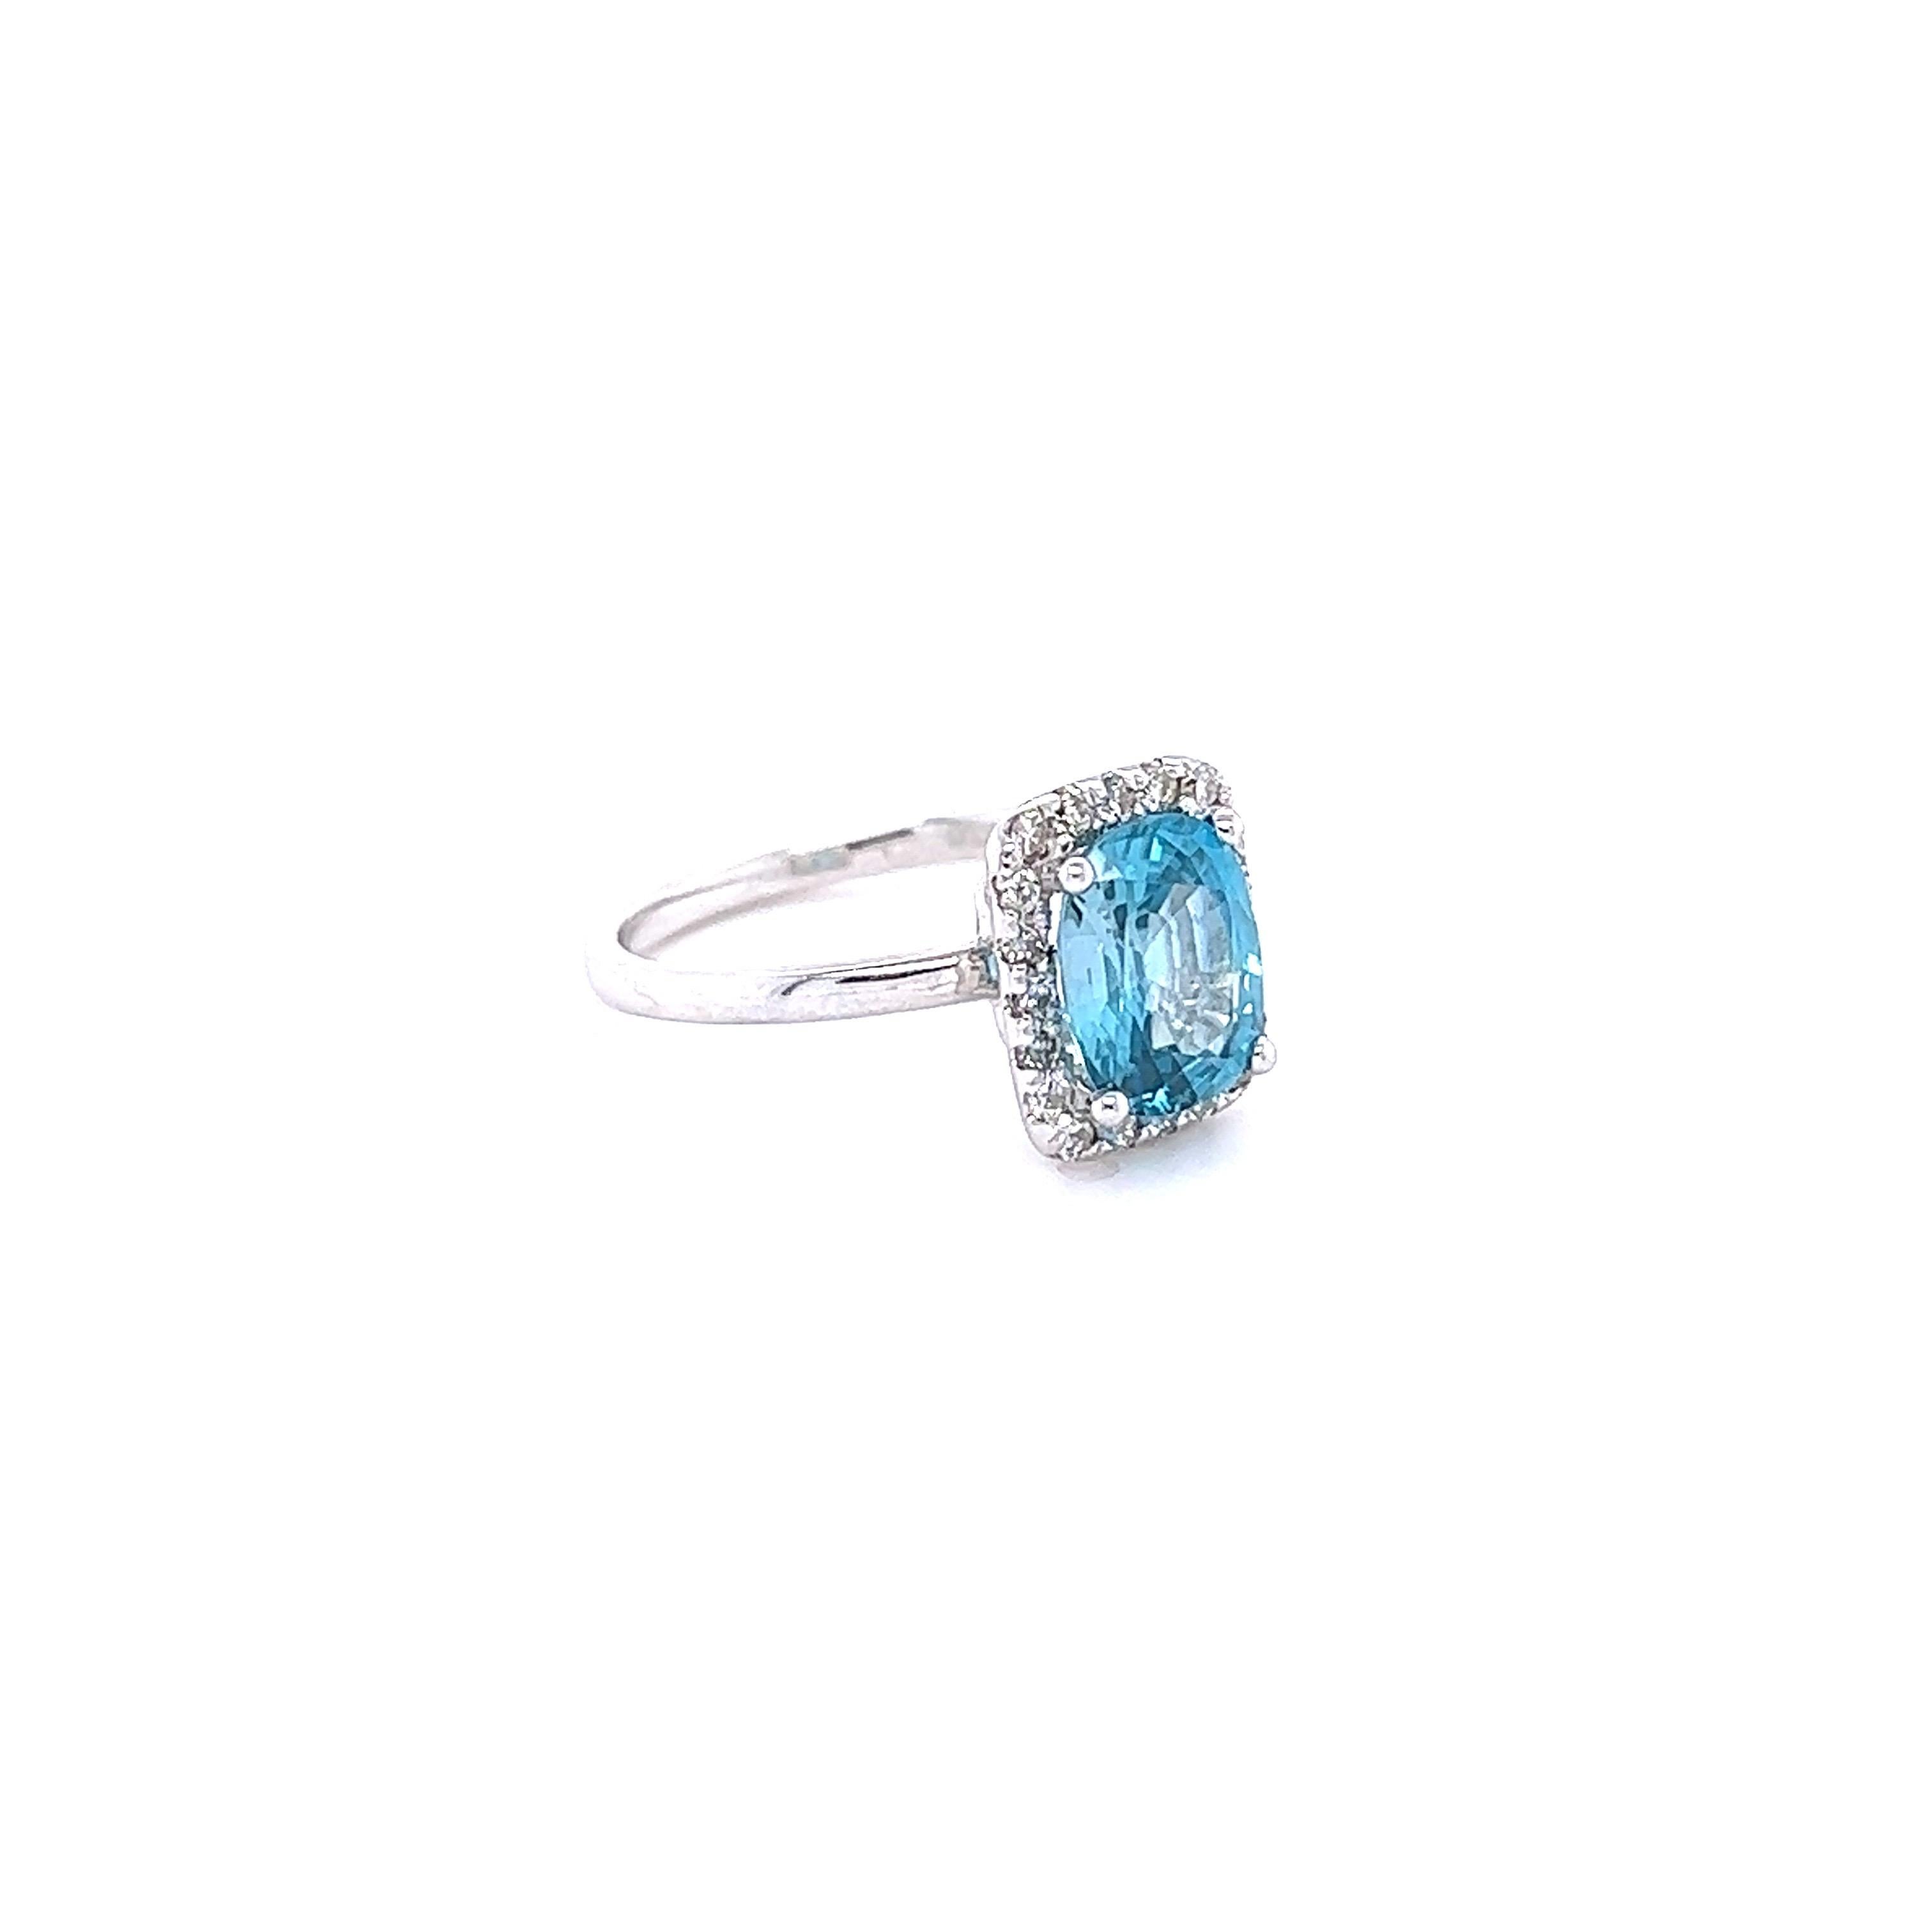 3.82 Carat Blue Zircon Diamond White Gold Ring In New Condition For Sale In Los Angeles, CA